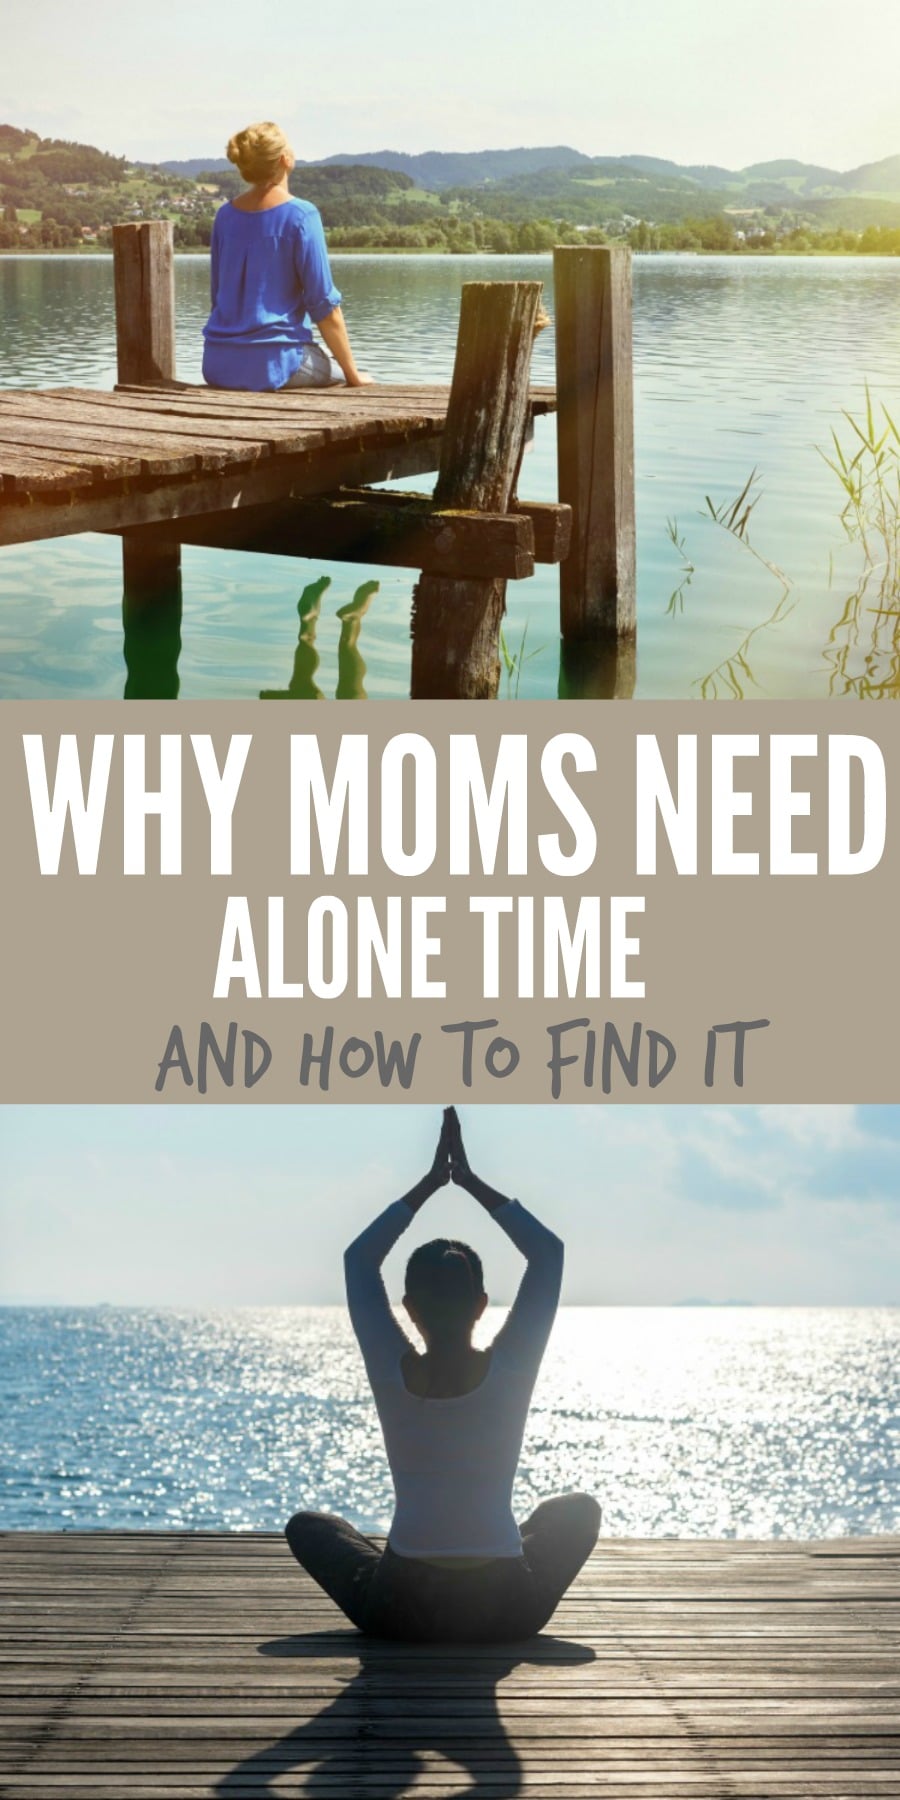 moms need alone time